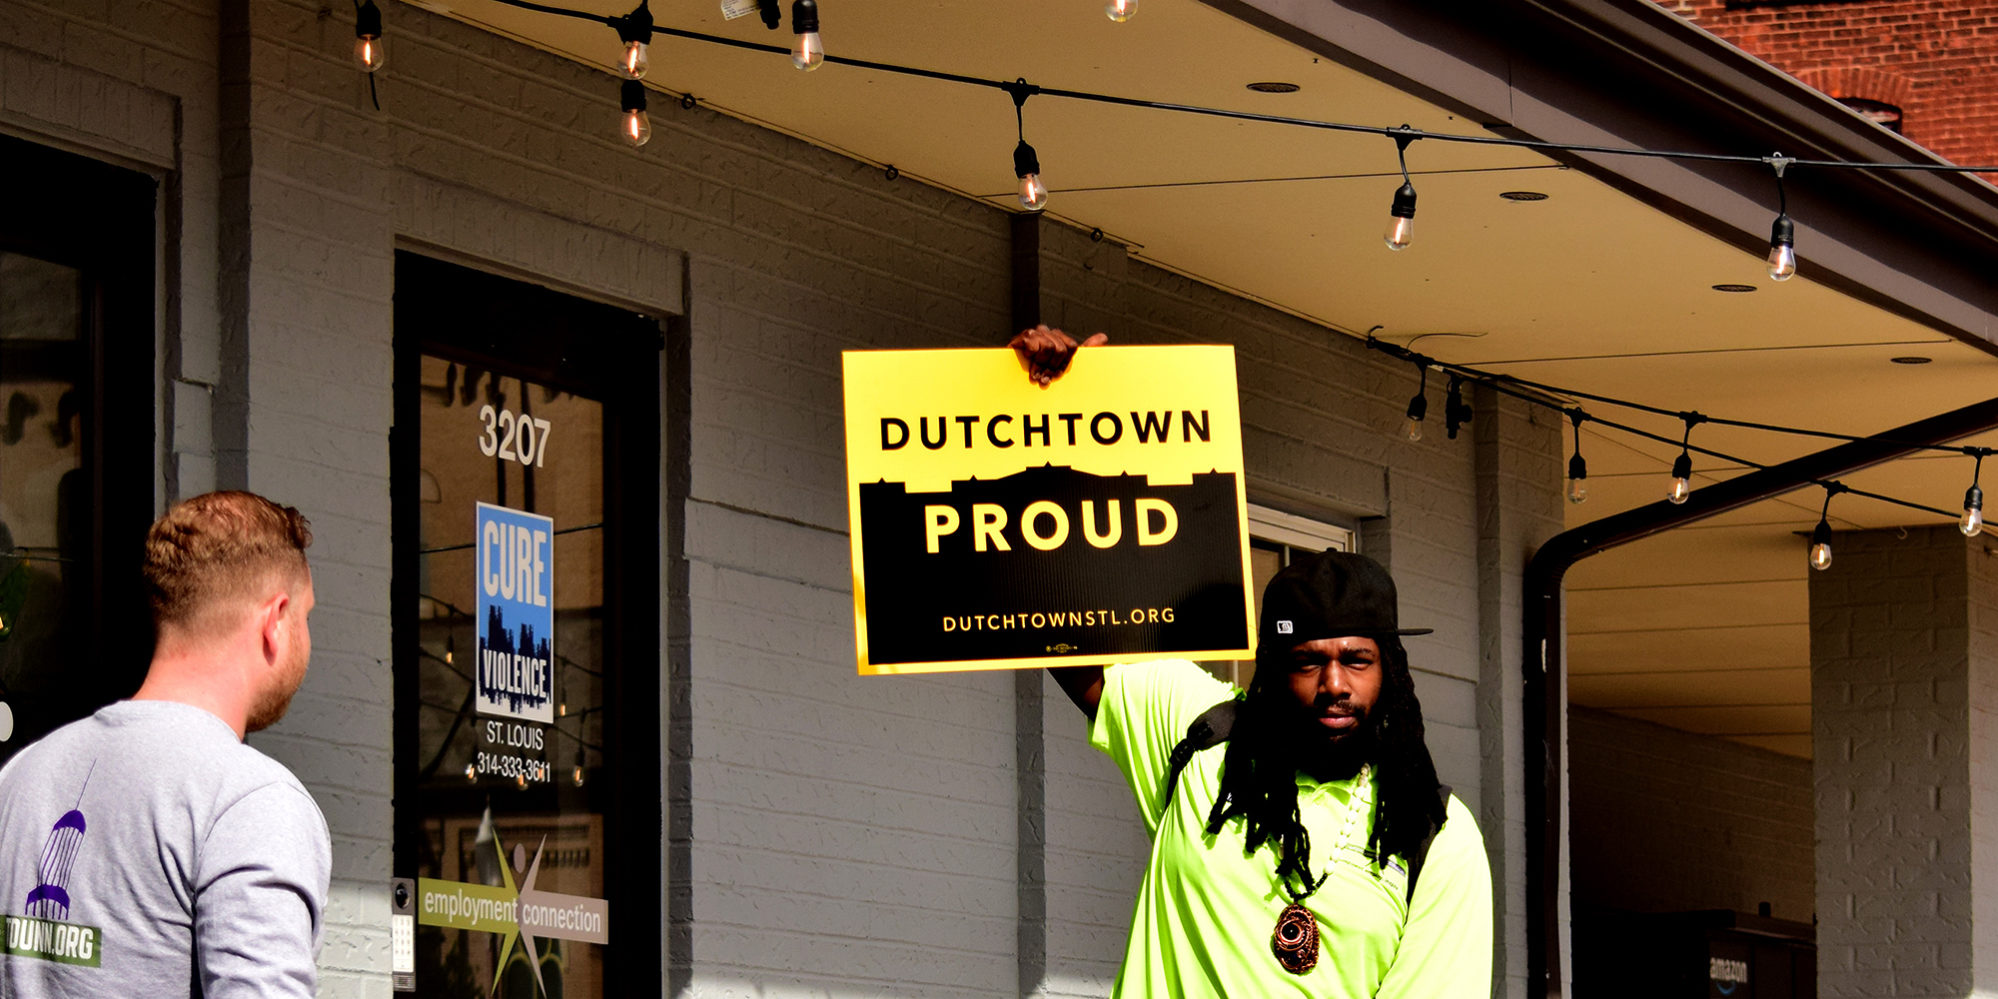 A Dutchtown neighbor holds a Dutchtown Proud sign in front of the Neighborhood Innovation Center in Downtown Dutchtown, St. Louis, MO.